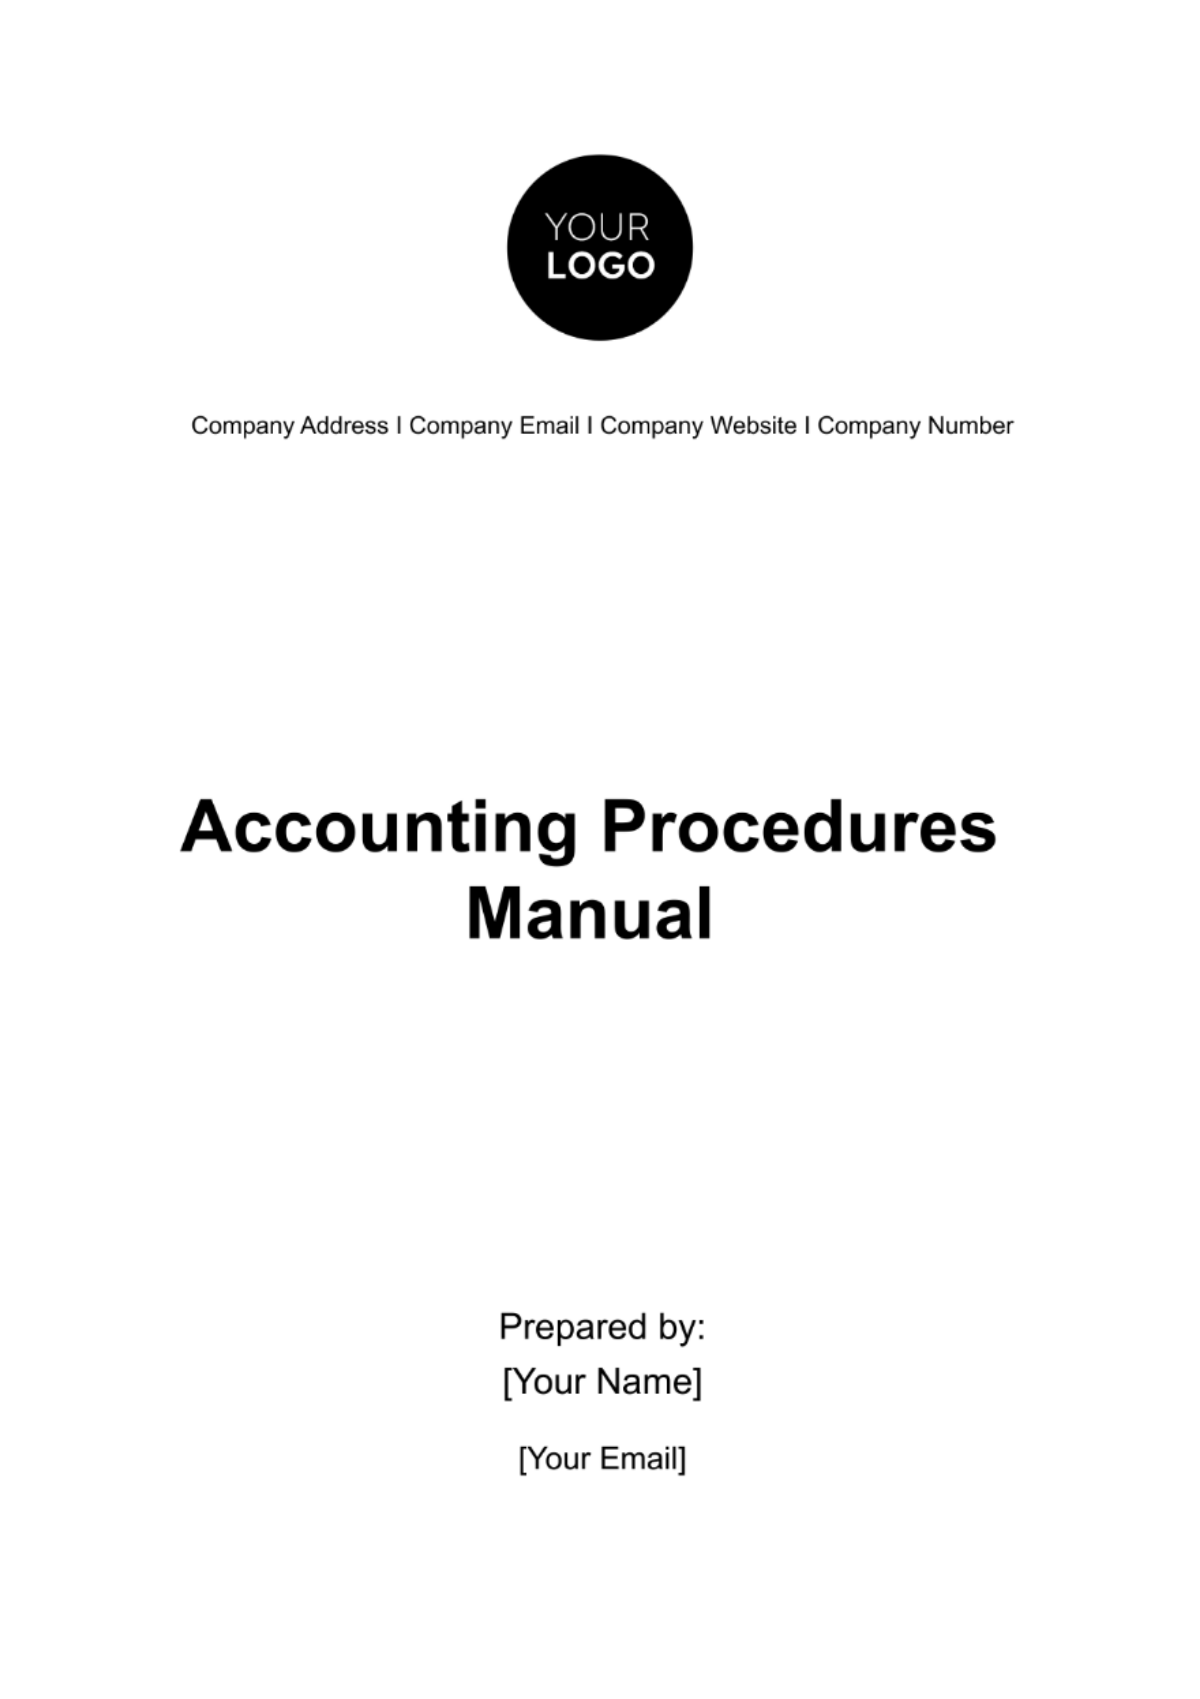 Accounting Procedures Manual Template